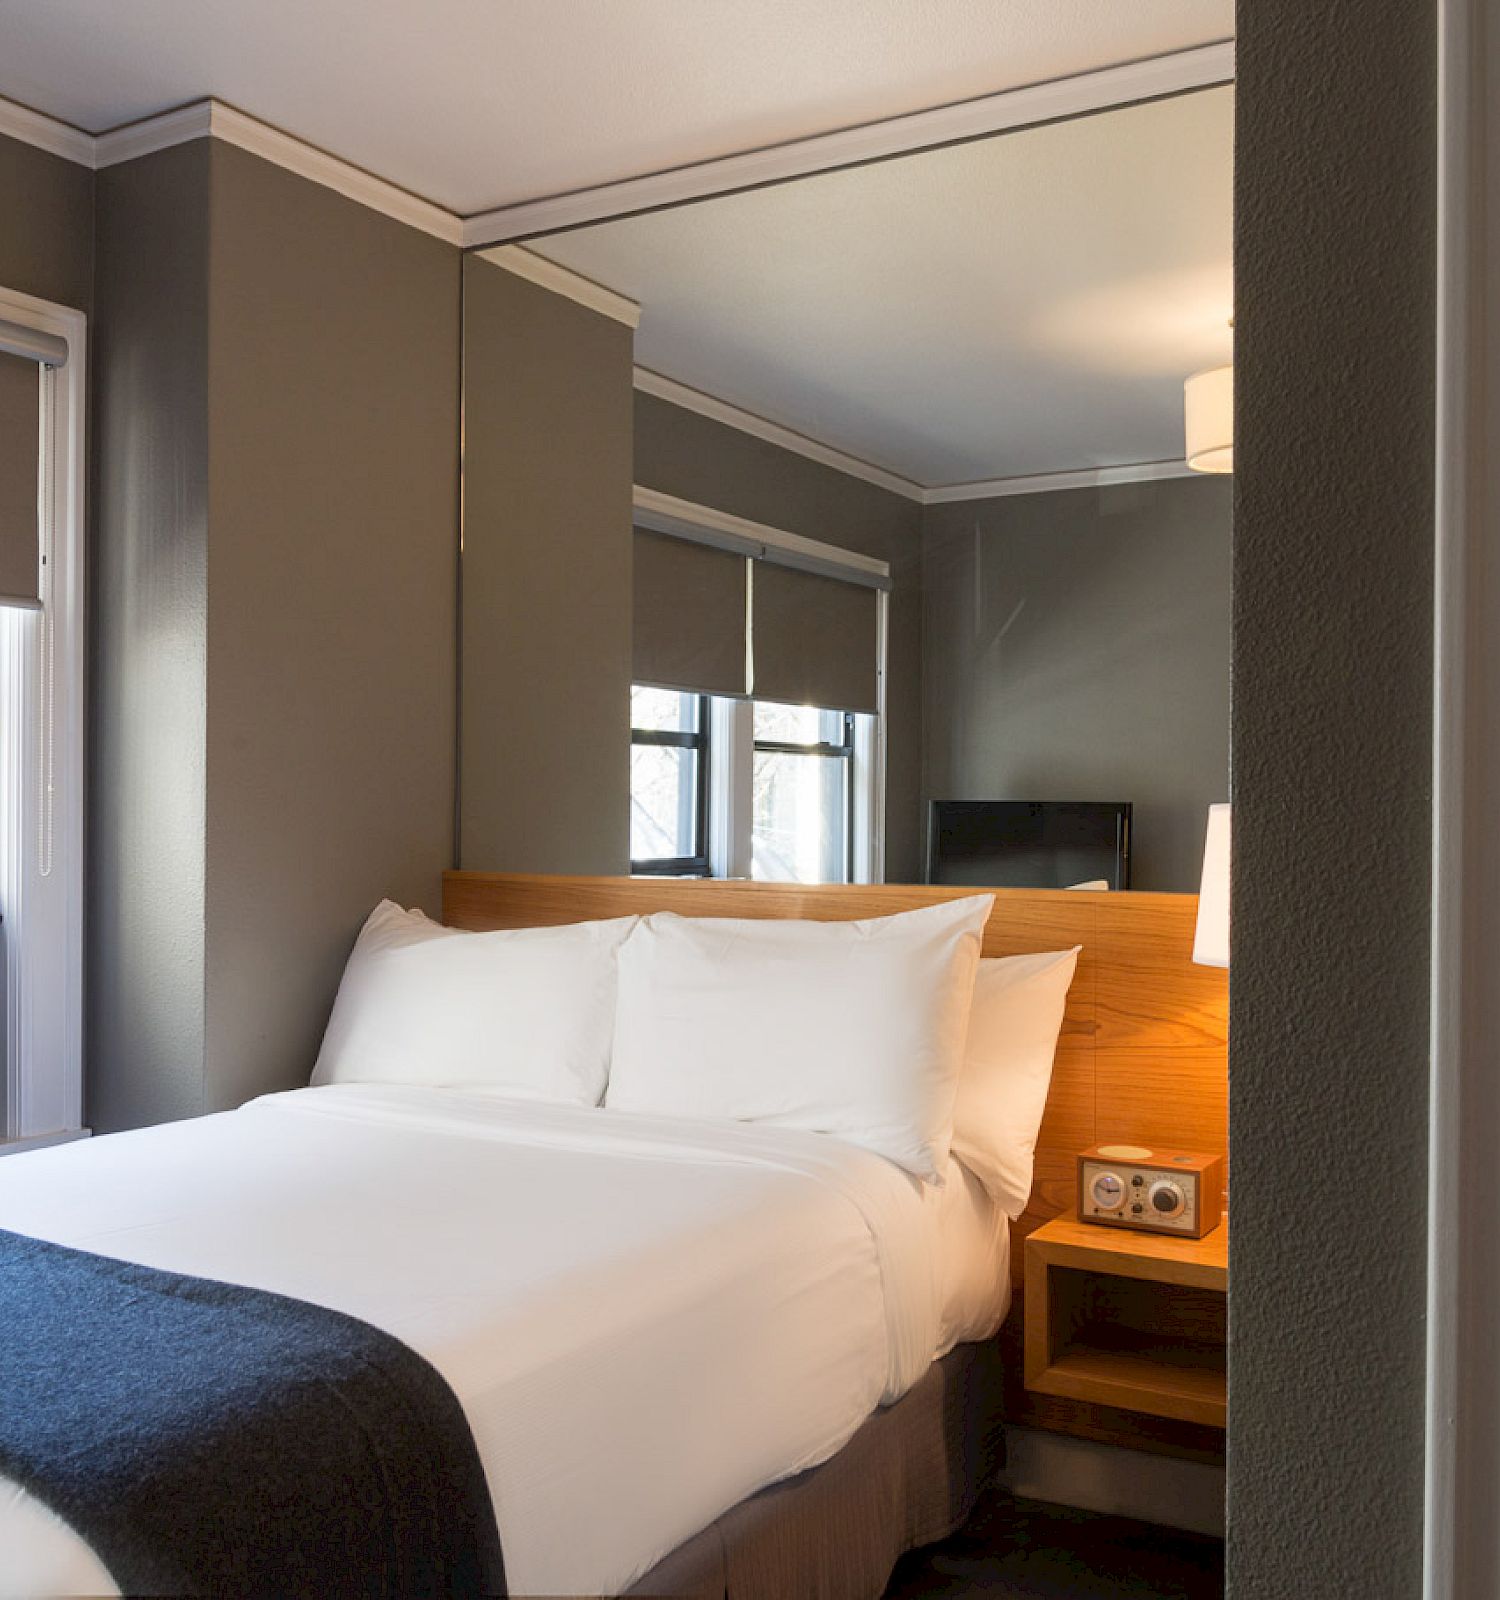 The image shows a small, modern hotel room with a neatly made bed, a nightstand, a window, air conditioning, and a mirror.